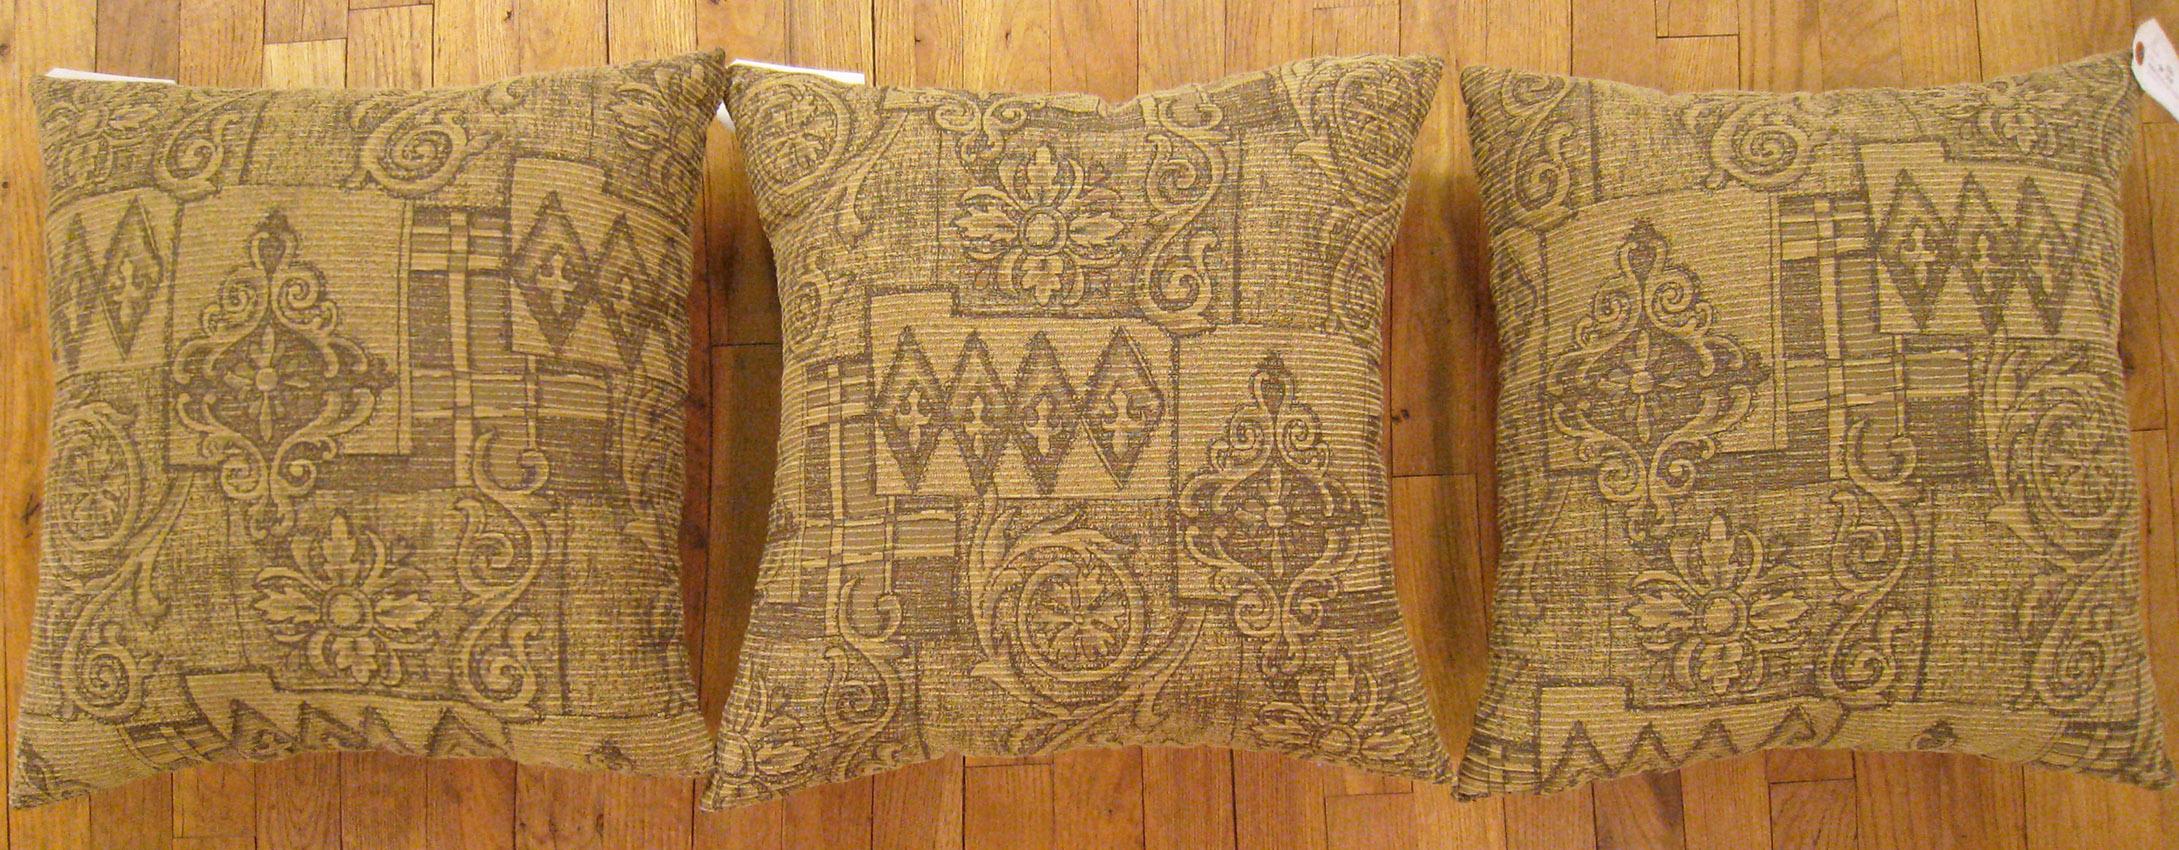 A Set of Vintage Floro-geometric Fabric Pillows ; size 1'8” x 1'6” Each.

A vintage american pillows with geometric abstracts in a beige central field, size 1'8” x 1'6” each. This lovely decorative pillow features a vintage fabric of a American